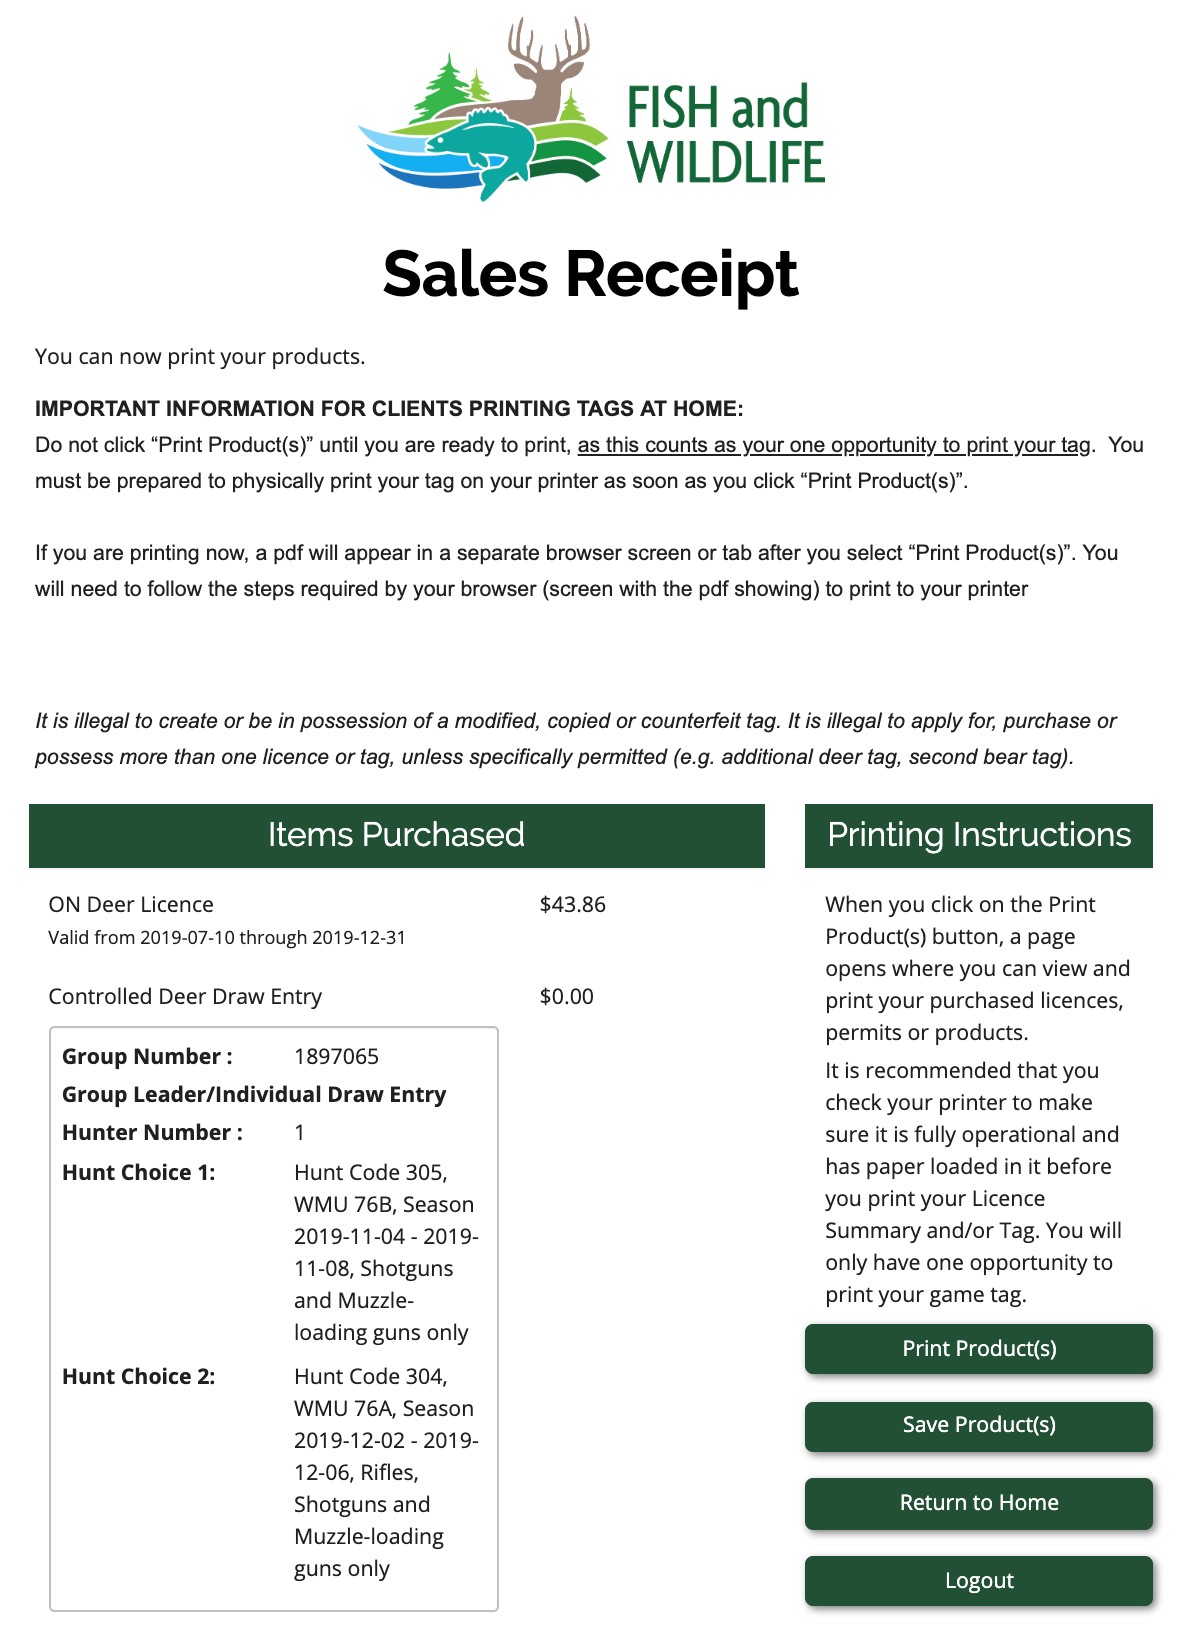 screenshot of the sales receipt, featuring printing instructions, items purchased, and email instructions.